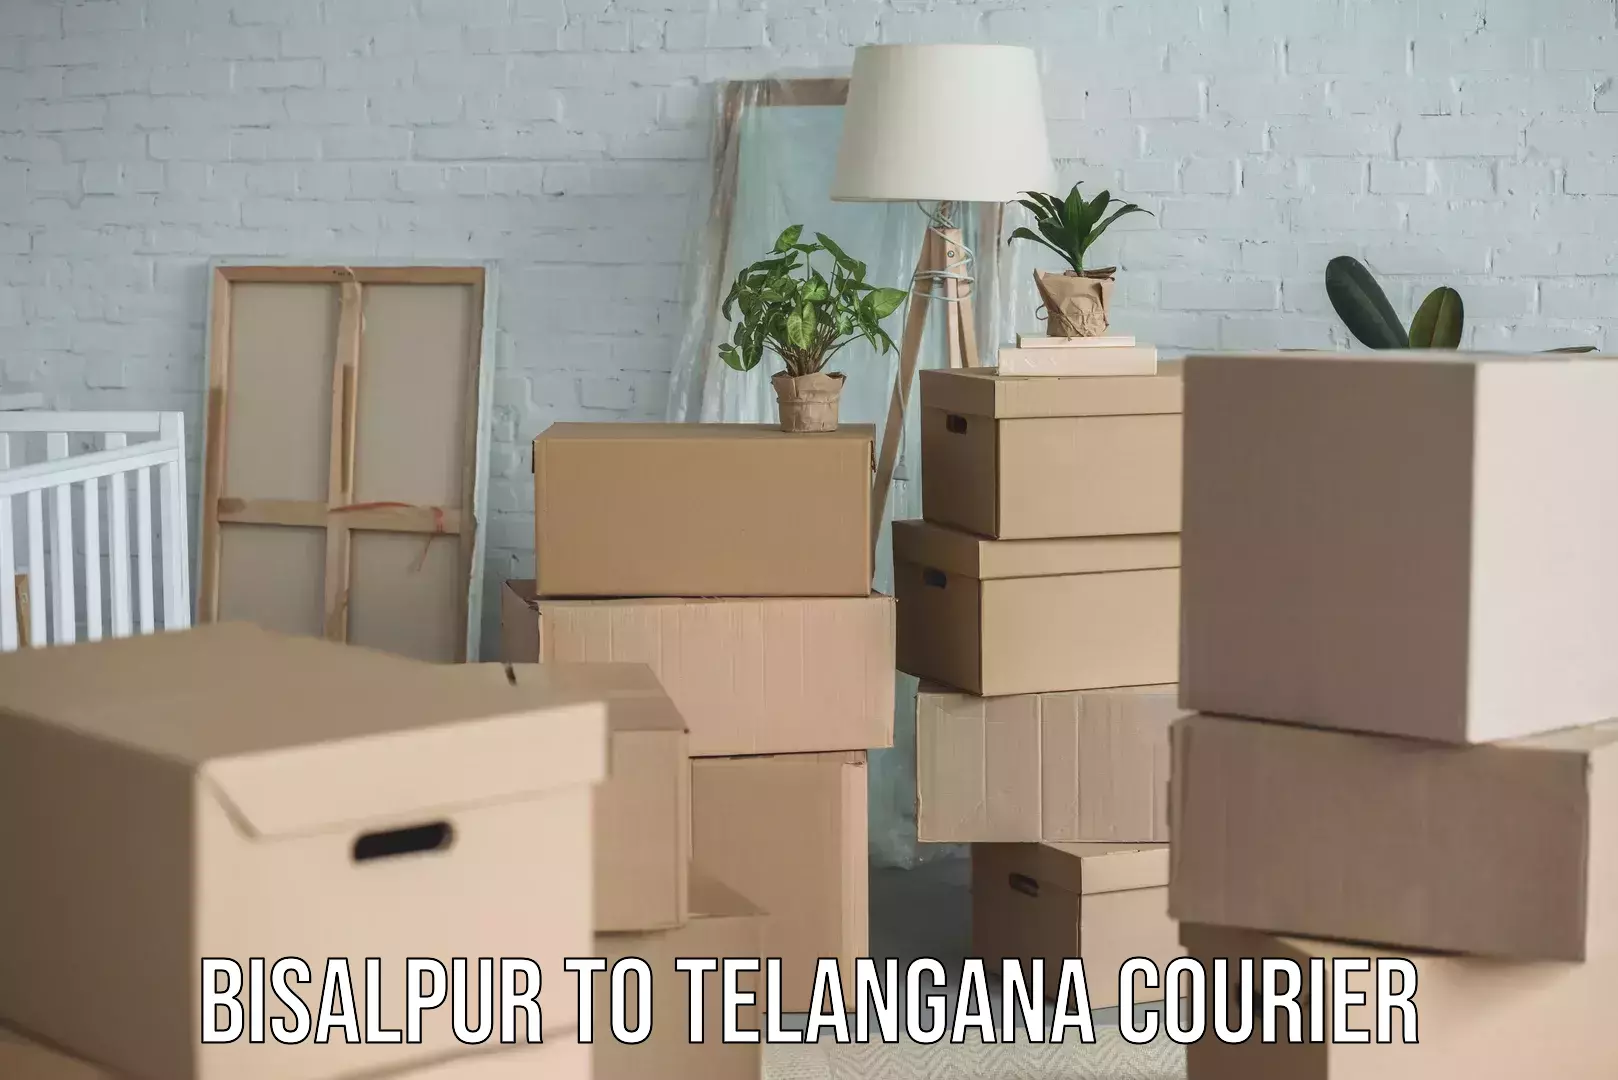 Subscription-based courier Bisalpur to Telangana